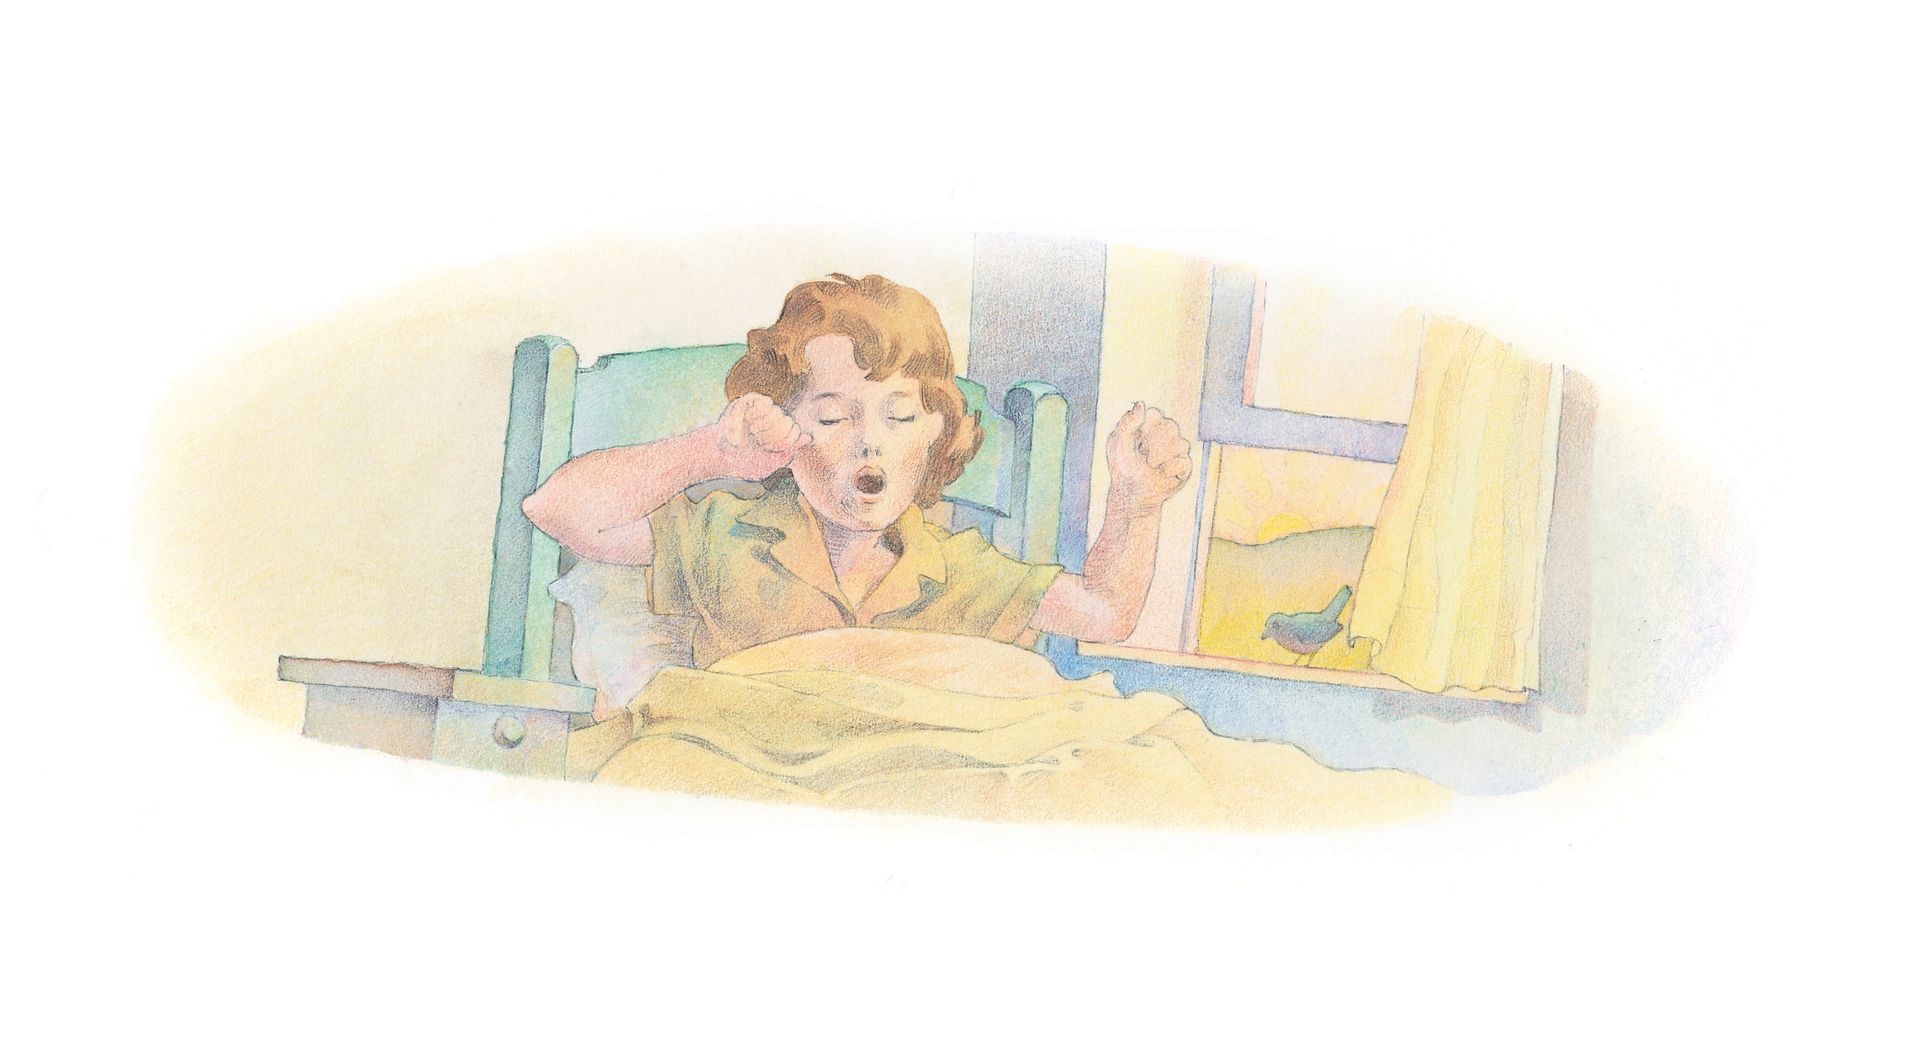 A child yawning and waking up at sunrise. From the Children’s Songbook, page 280, “Healthy, Wealthy, and Wise (Round)”; watercolor illustration by Richard Hull.